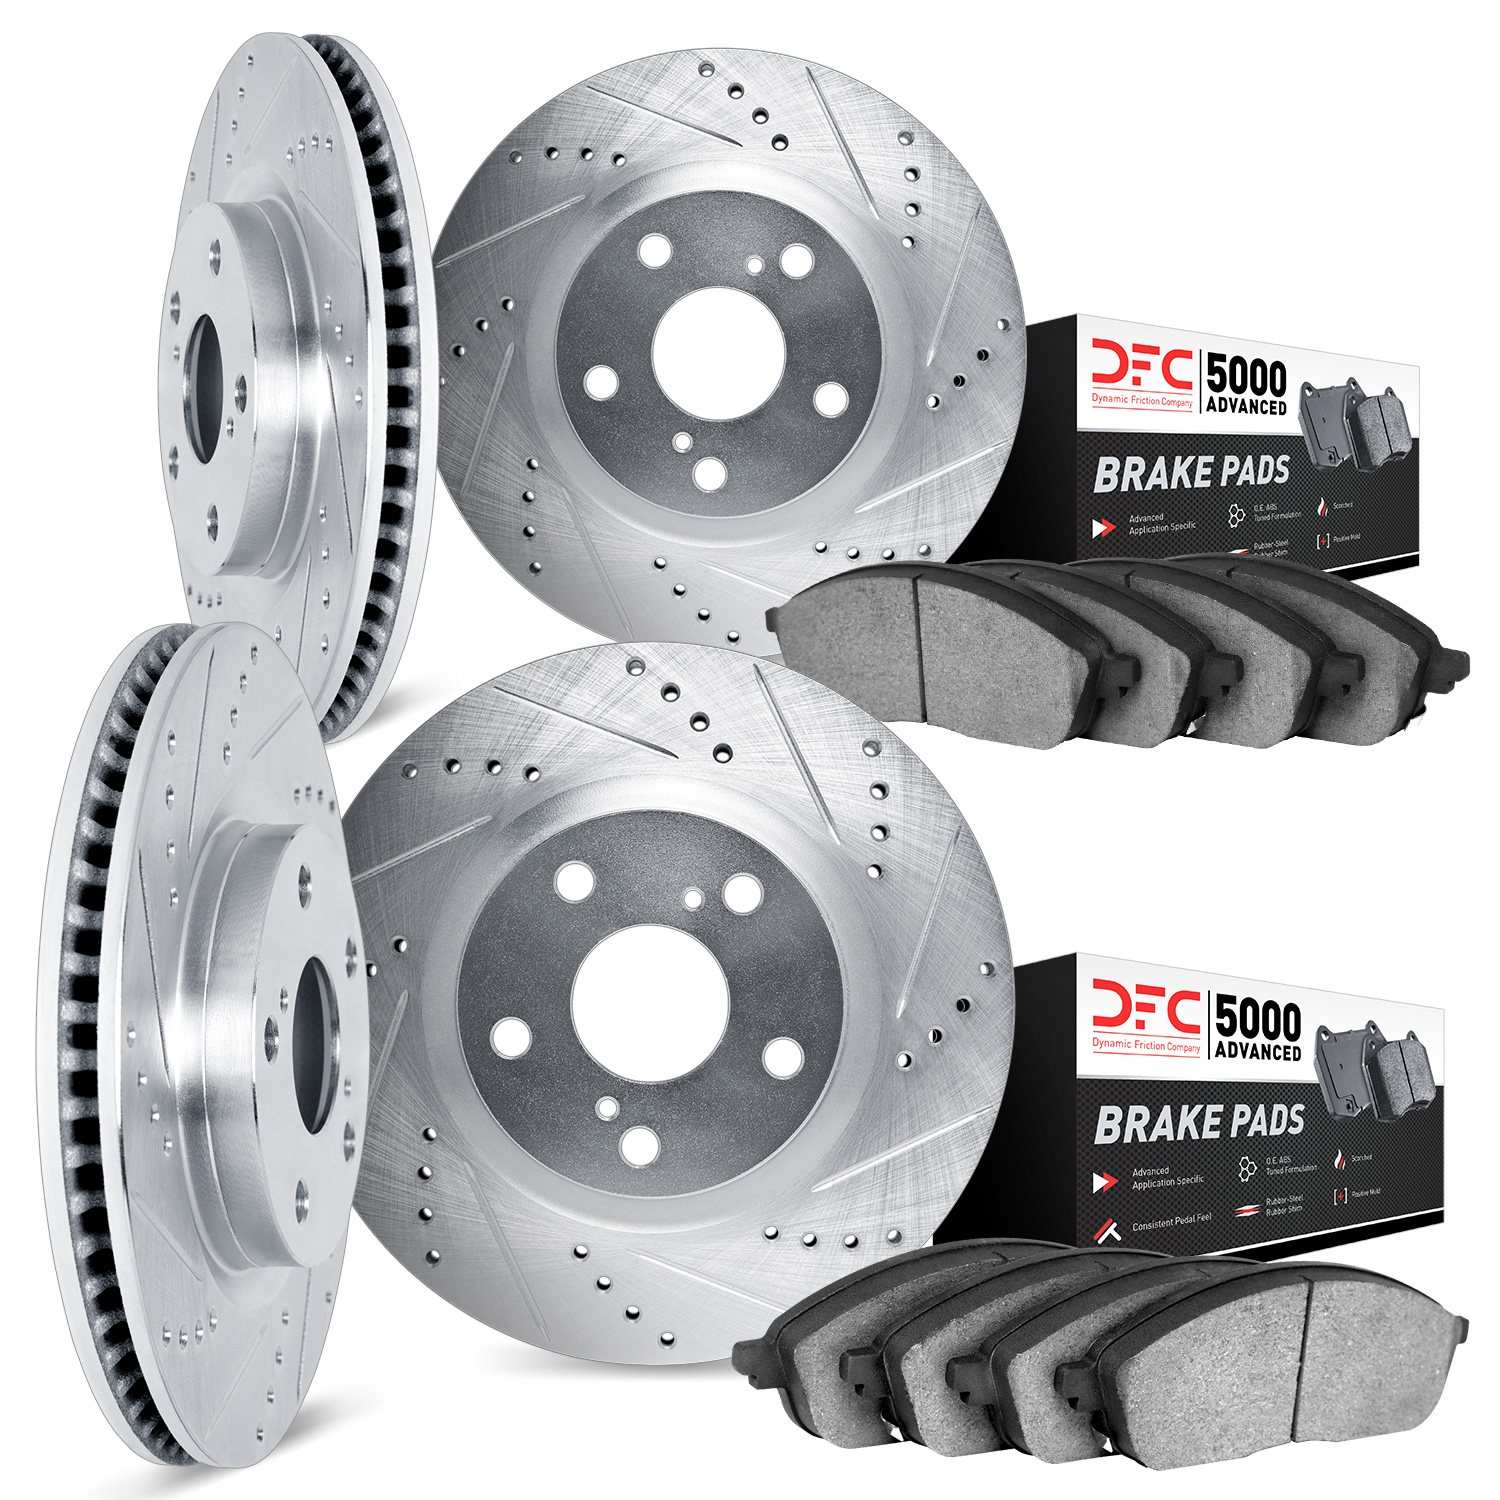 7504-13035 Drilled/Slotted Brake Rotors w/5000 Advanced Brake Pads Kit [Silver], 2014-2018 Subaru, Position: Front and Rear